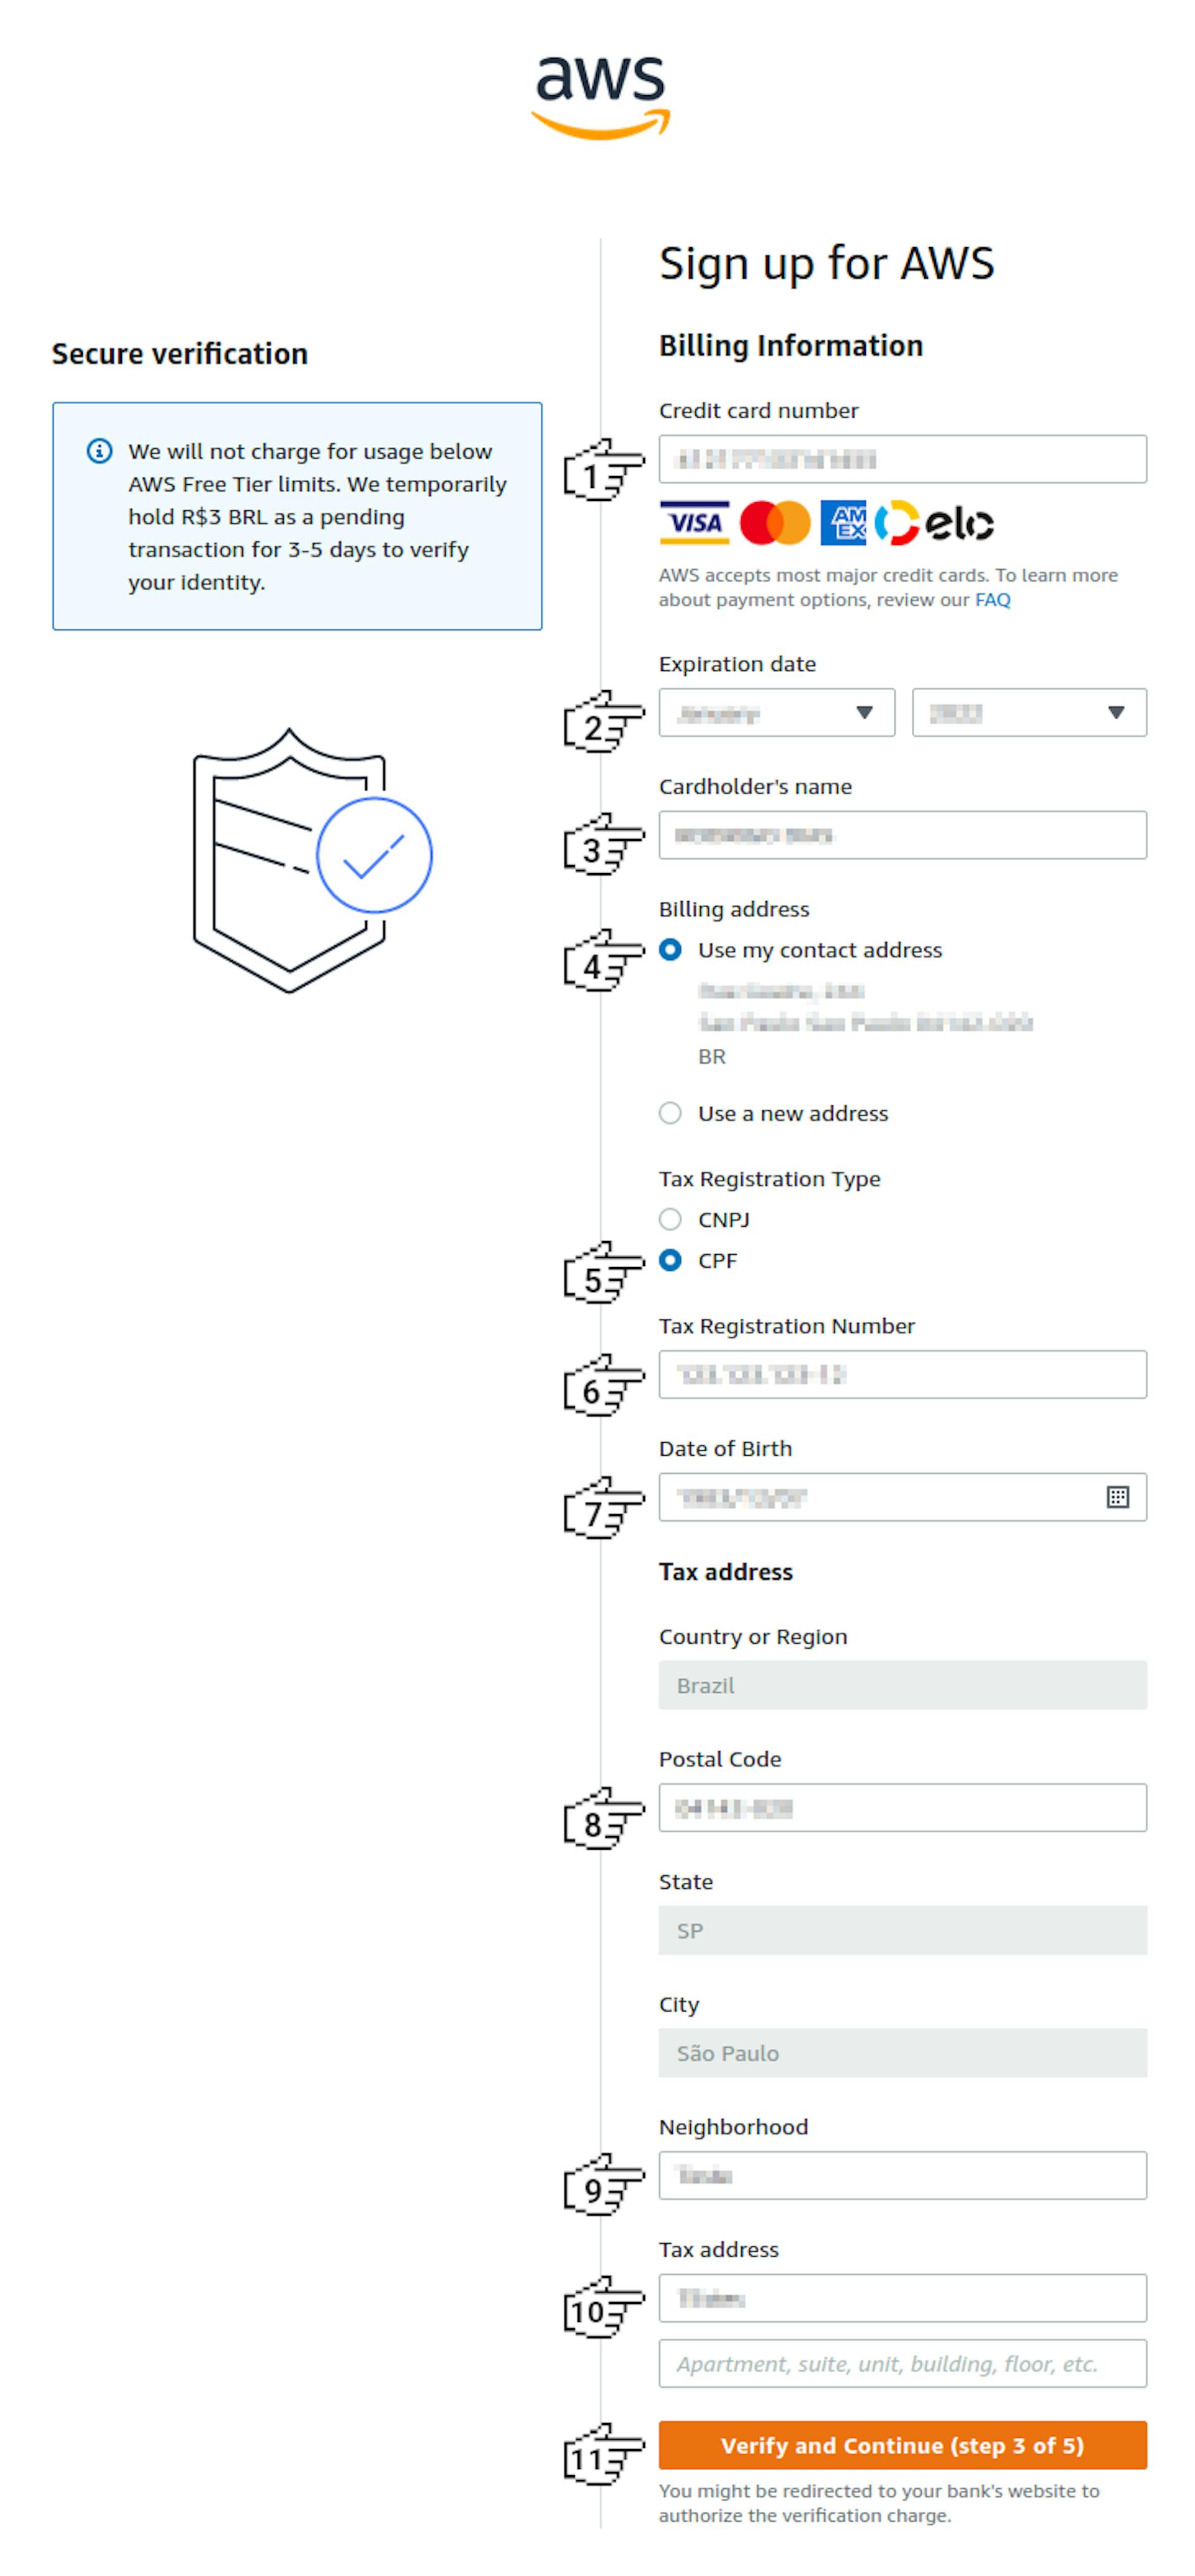 Amazon Cognito - Sign up for AWS (step 2 of 5)